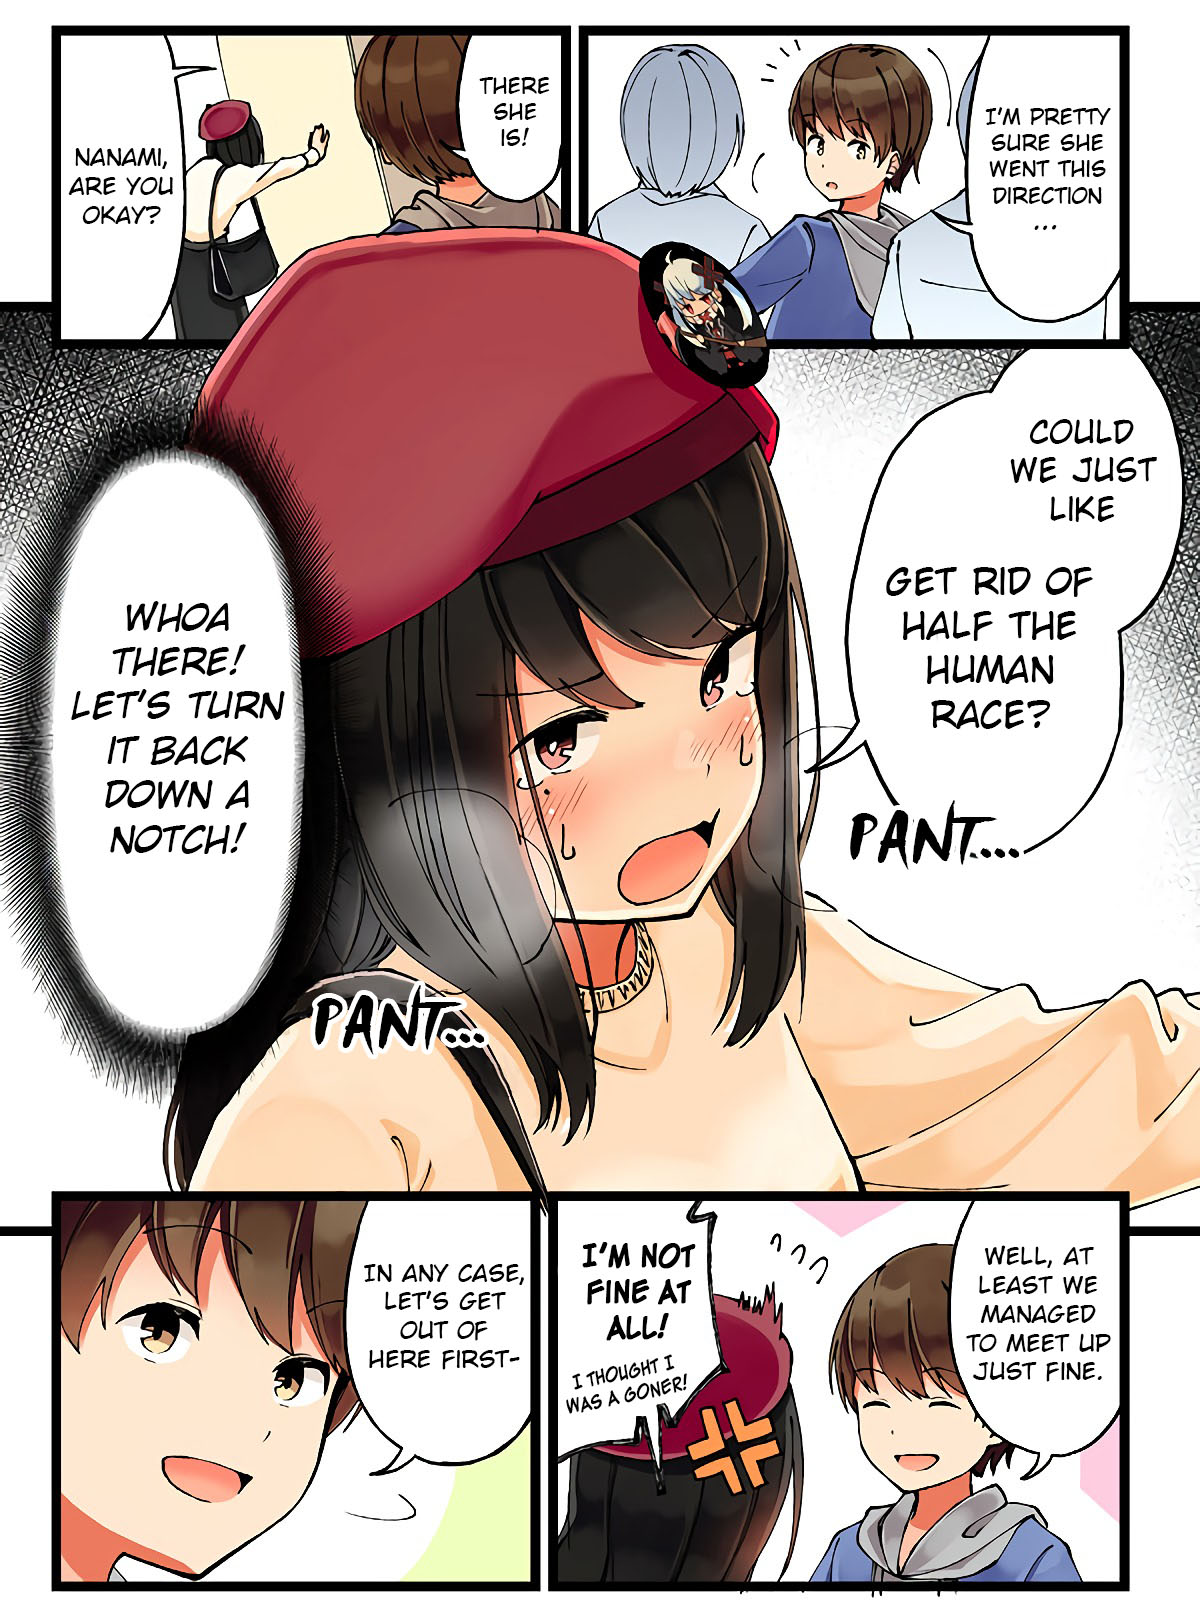 Hanging Out with a Gamer Girl Ch. 20 I almost get separated from my gamer friend